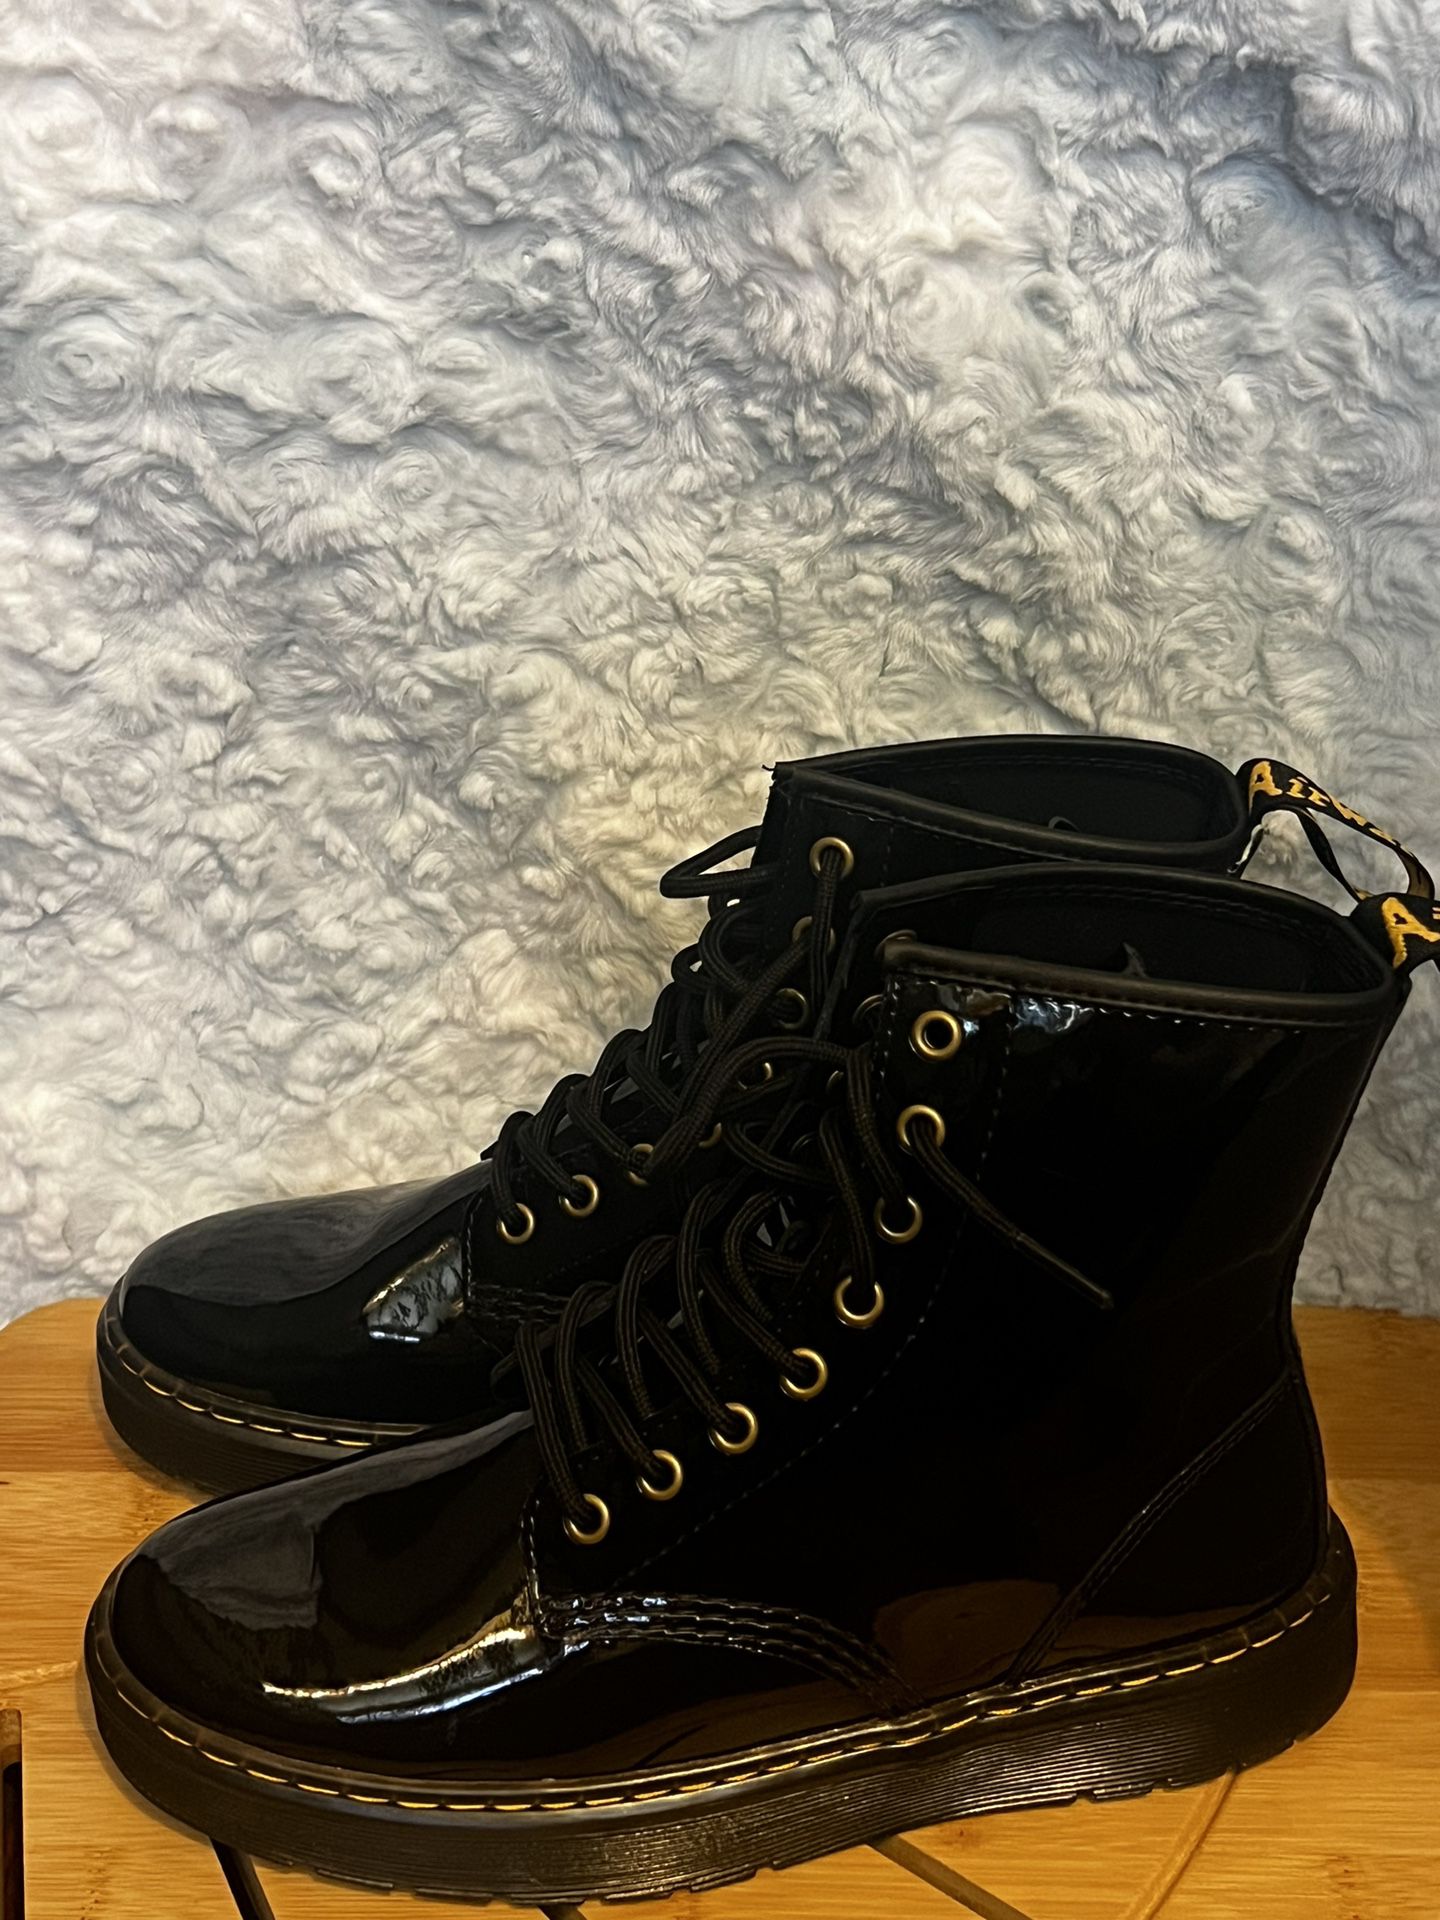 Dr. Martens Zavala Casual Combat boot.  Size US7 M  Leather upper, Lug-style rubber outsole.